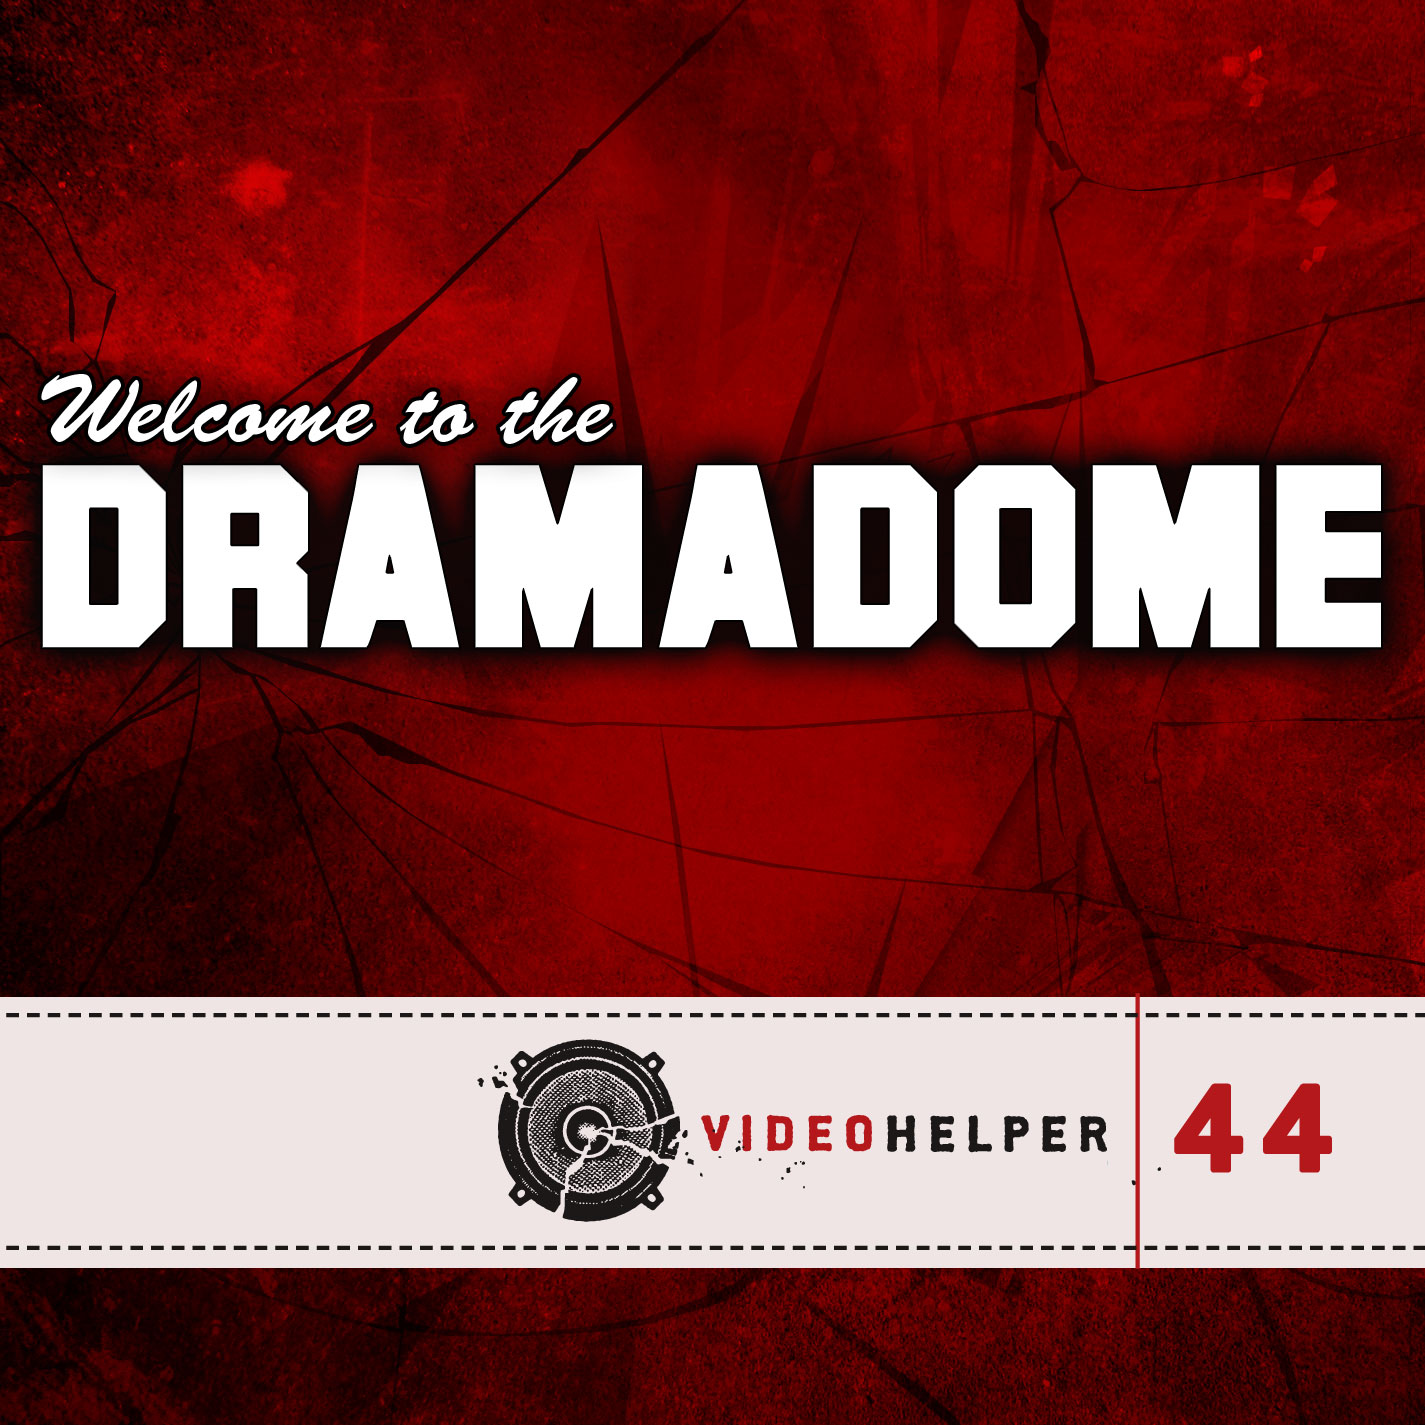 VideoHelper: Welcome To The Dramadome